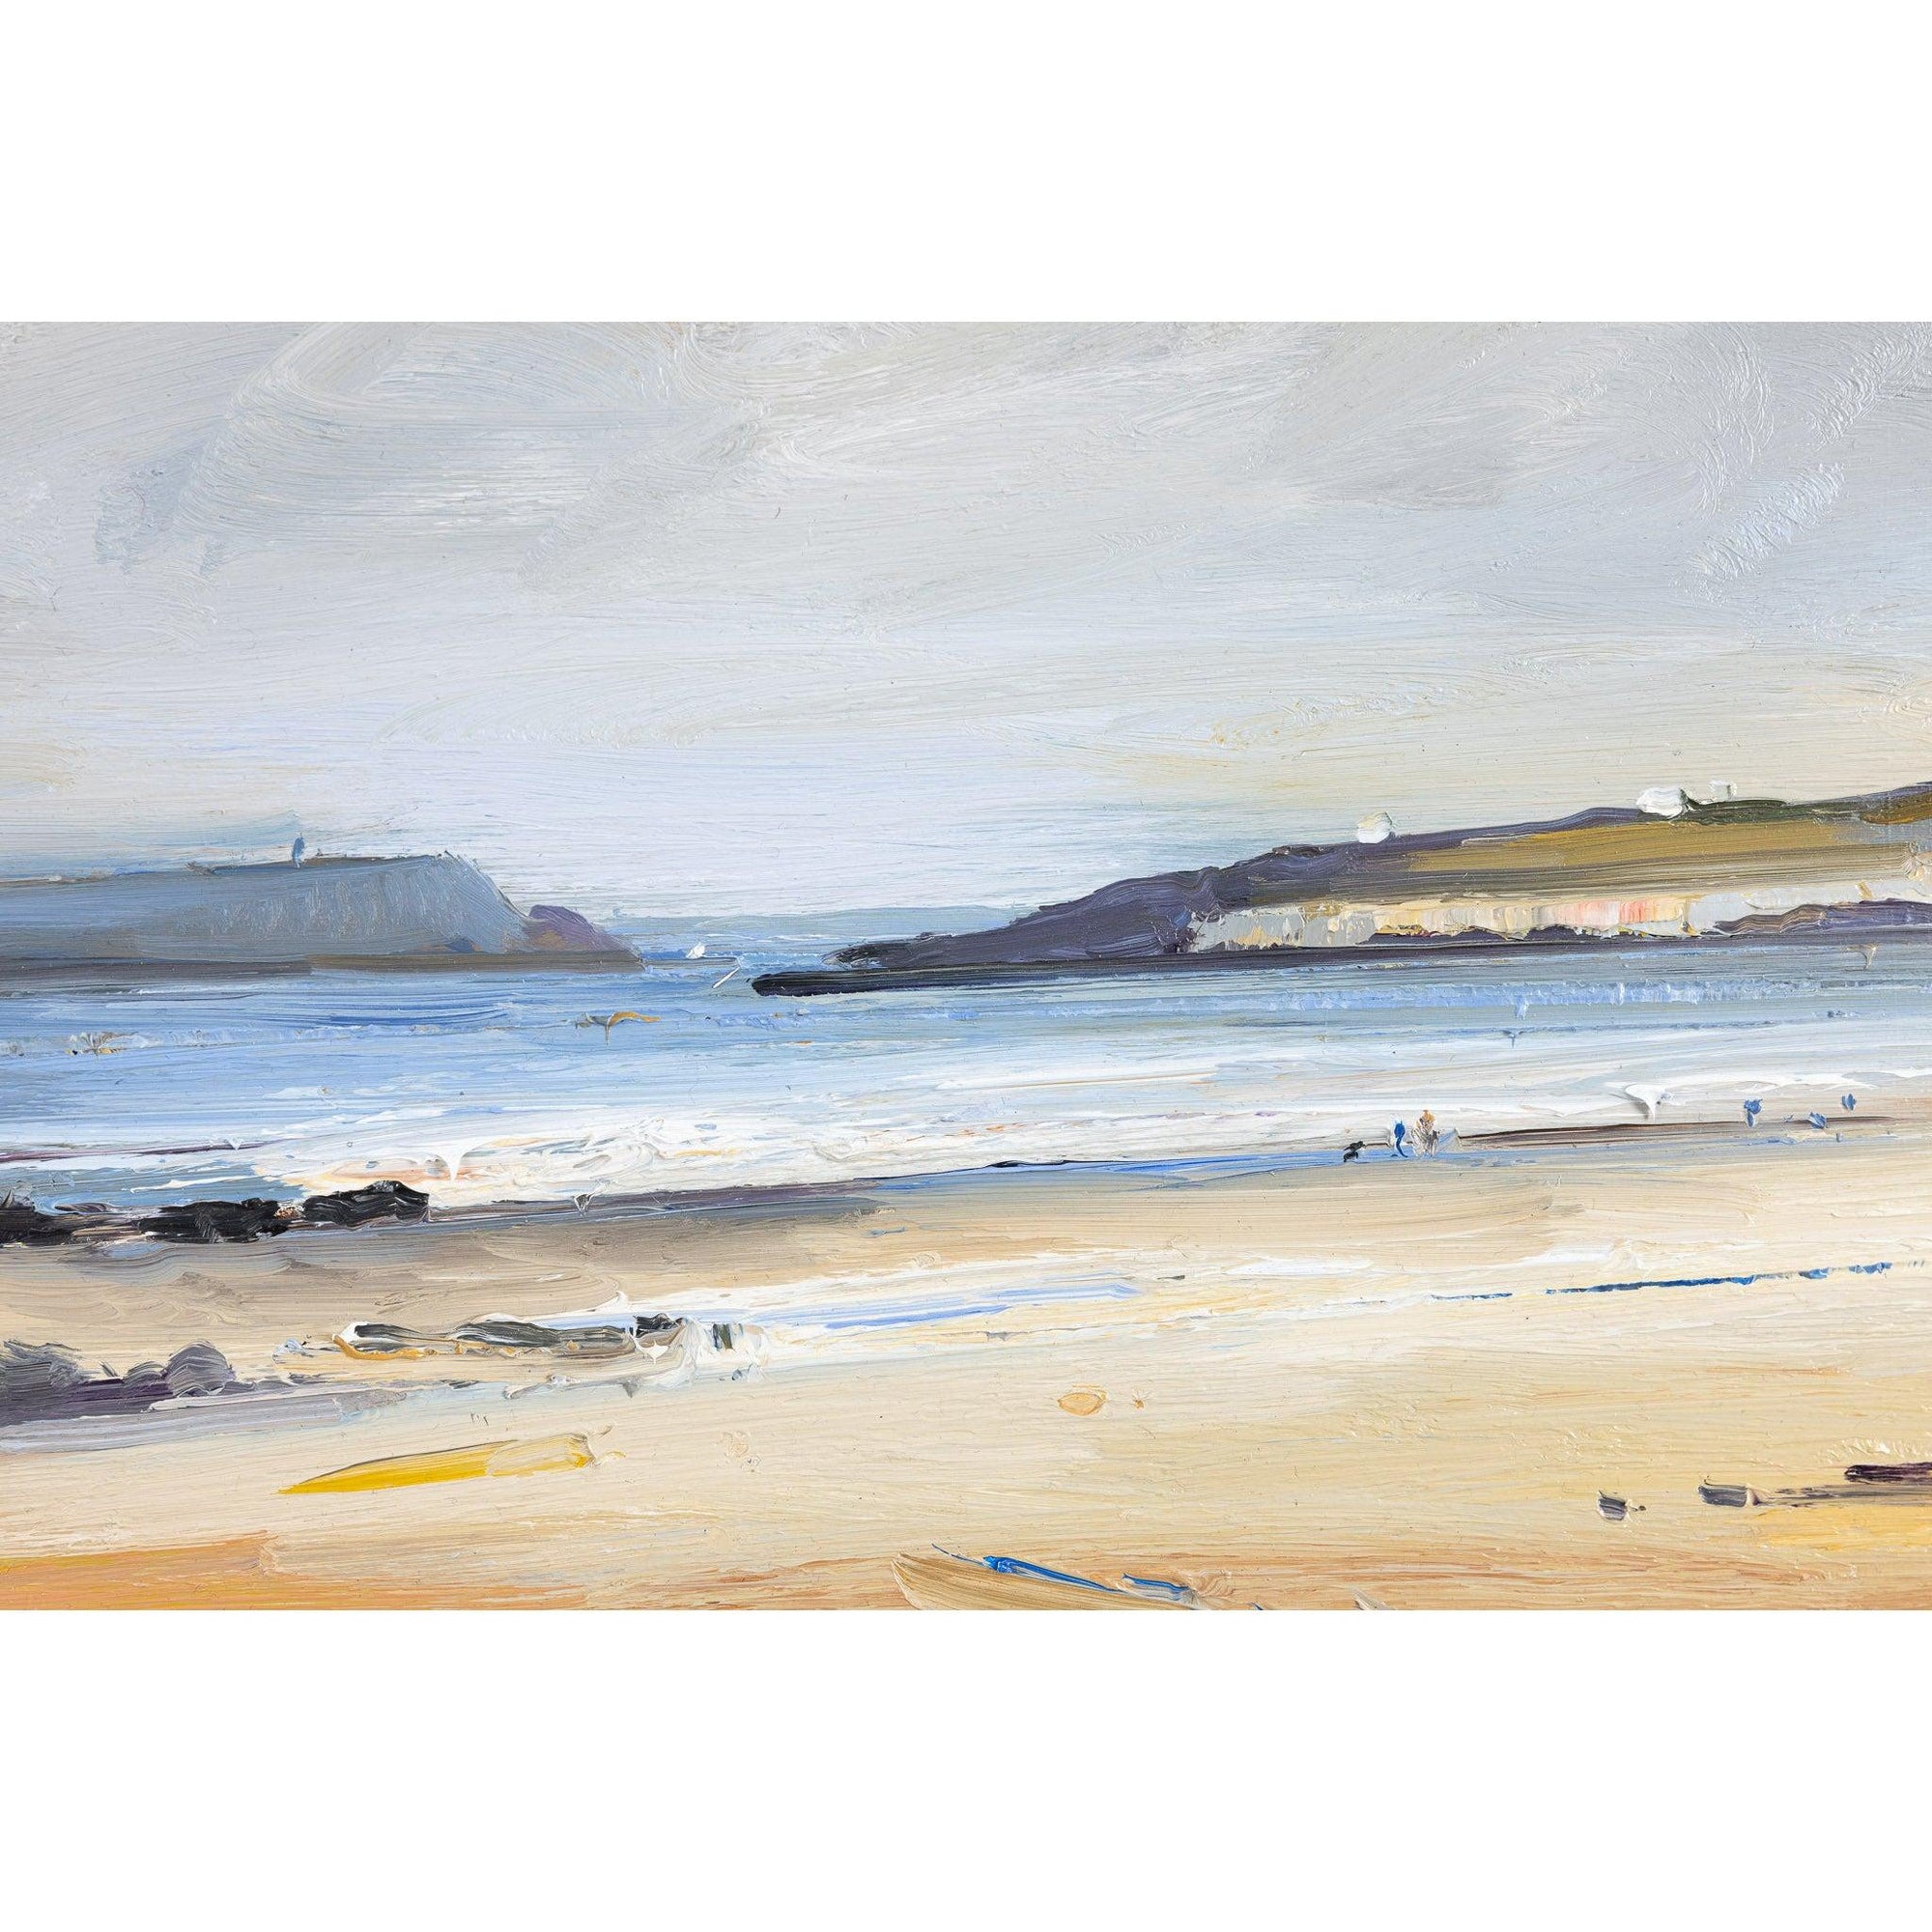 ‘Early Autumn on Daymer Bay' oil on board original by David Atkins, available at Padstow Gallery, Cornwall